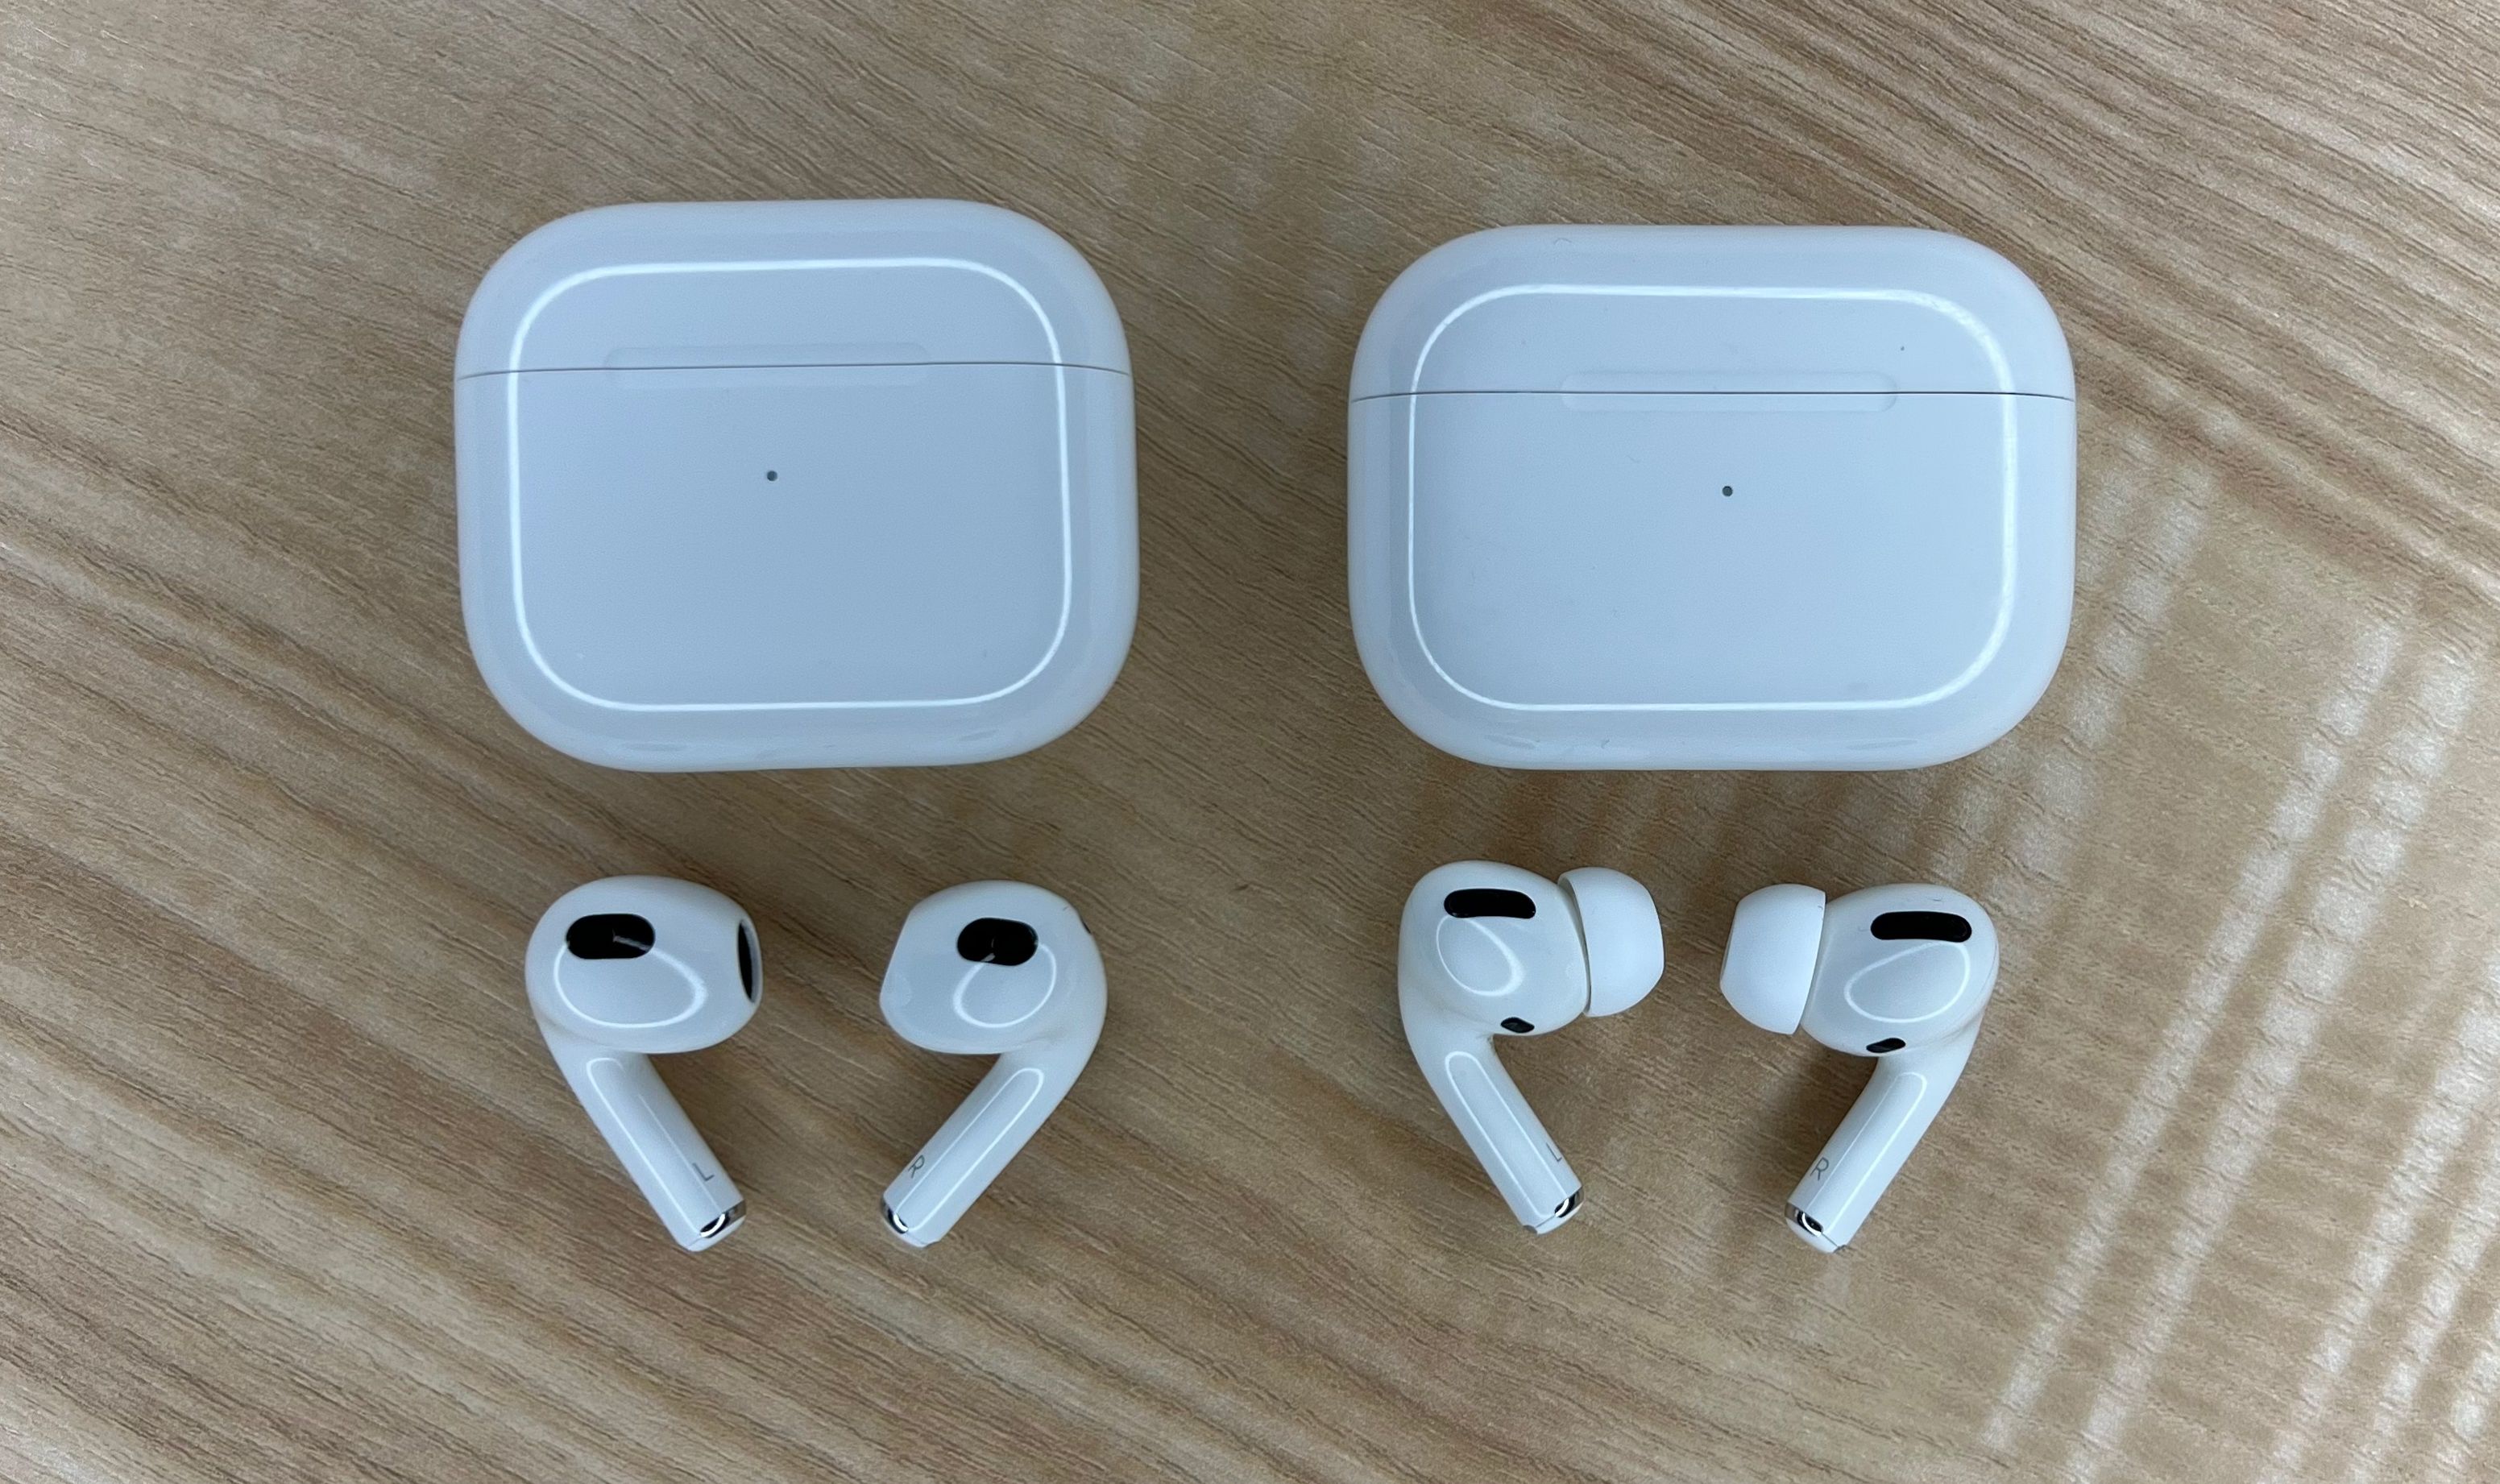 Baron Final vasketøj AirPods Pro vs. AirPods 3: What's the difference? | CNN Underscored